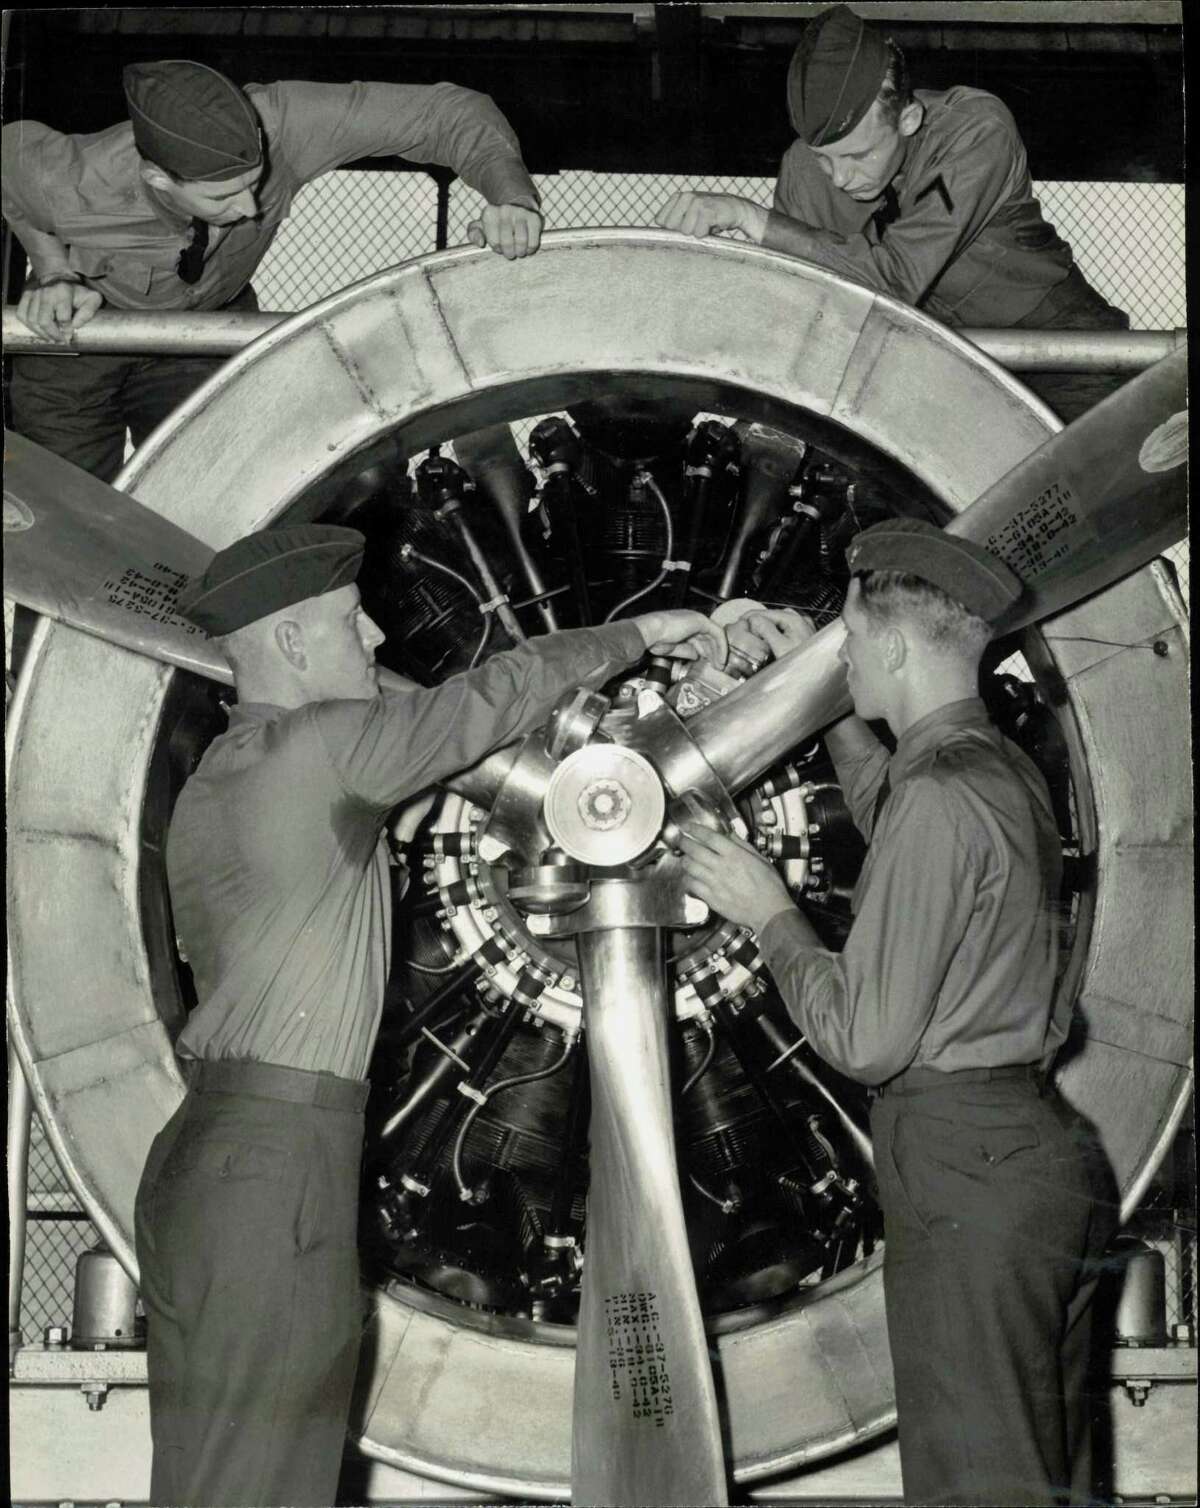 'Trouble-shooting' an air giant - It's a game of hide-and-seek for these flying cadets at Randolph Field, Texas, as they study a huge 900 horsepower plane motor. These cadets are checking a modern two speed supercharger radial engine, the same type used in Uncle Sam's four motored armed bombers.